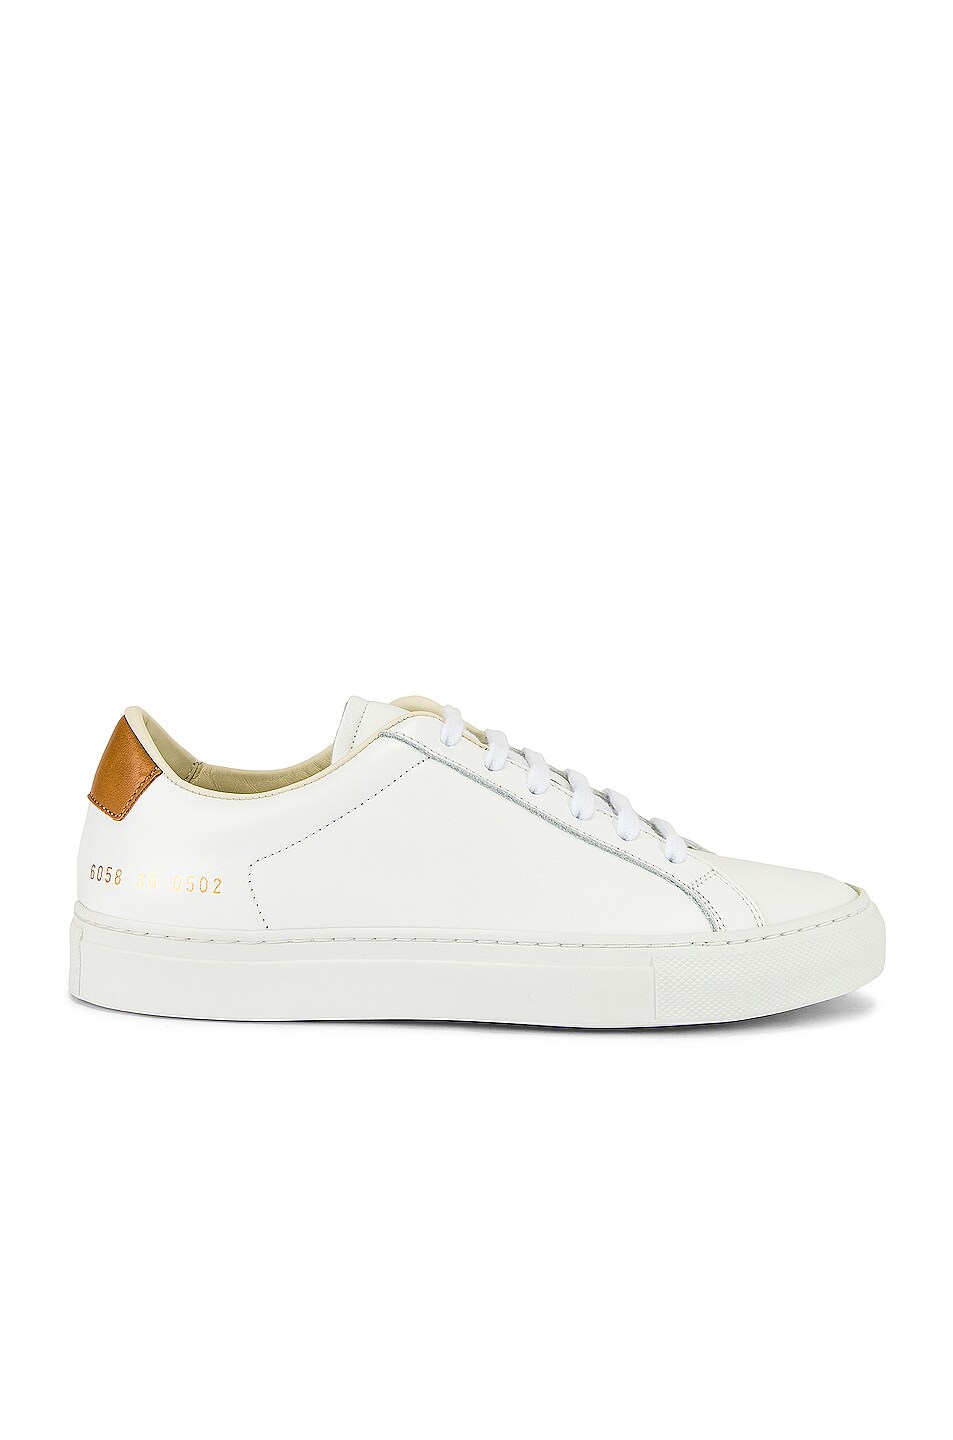 Image 1 of Common Projects Retro Low Sneaker in White & Tan